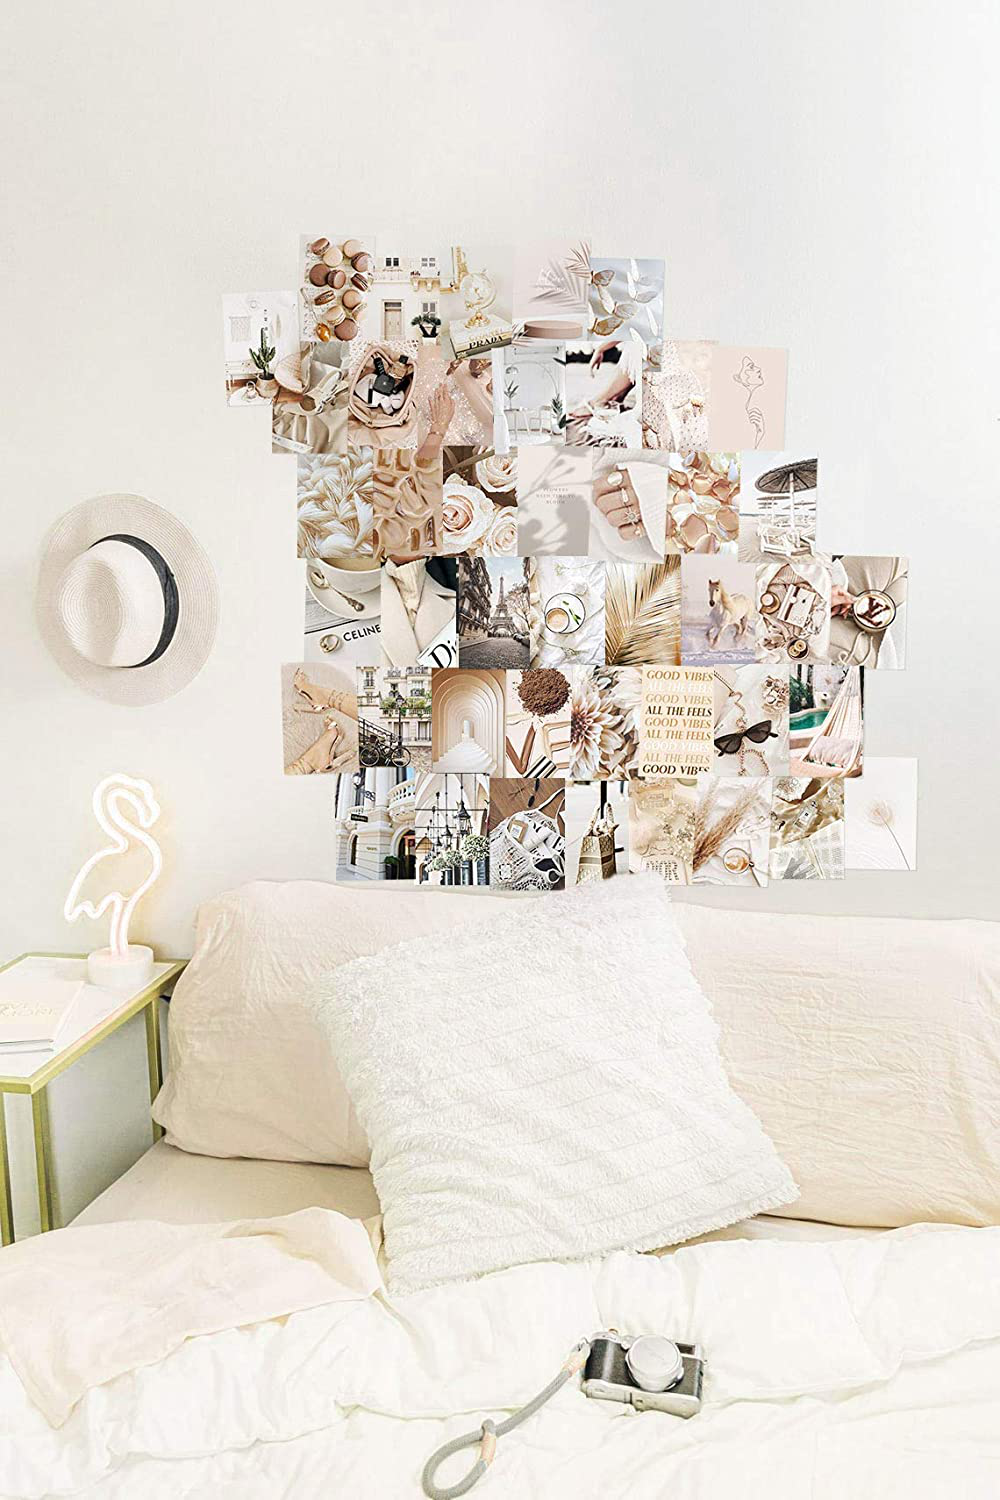 Neutral Wall Collage Kit Aesthetic Pictures, Aesthetic Room Decor, Bedroom Decor for Teen Girls, Wall Collage Kit, VSCO Room Decor, Photo Wall, Aesthetic Posters, Collage Kit (50 Set 4x6 inch)